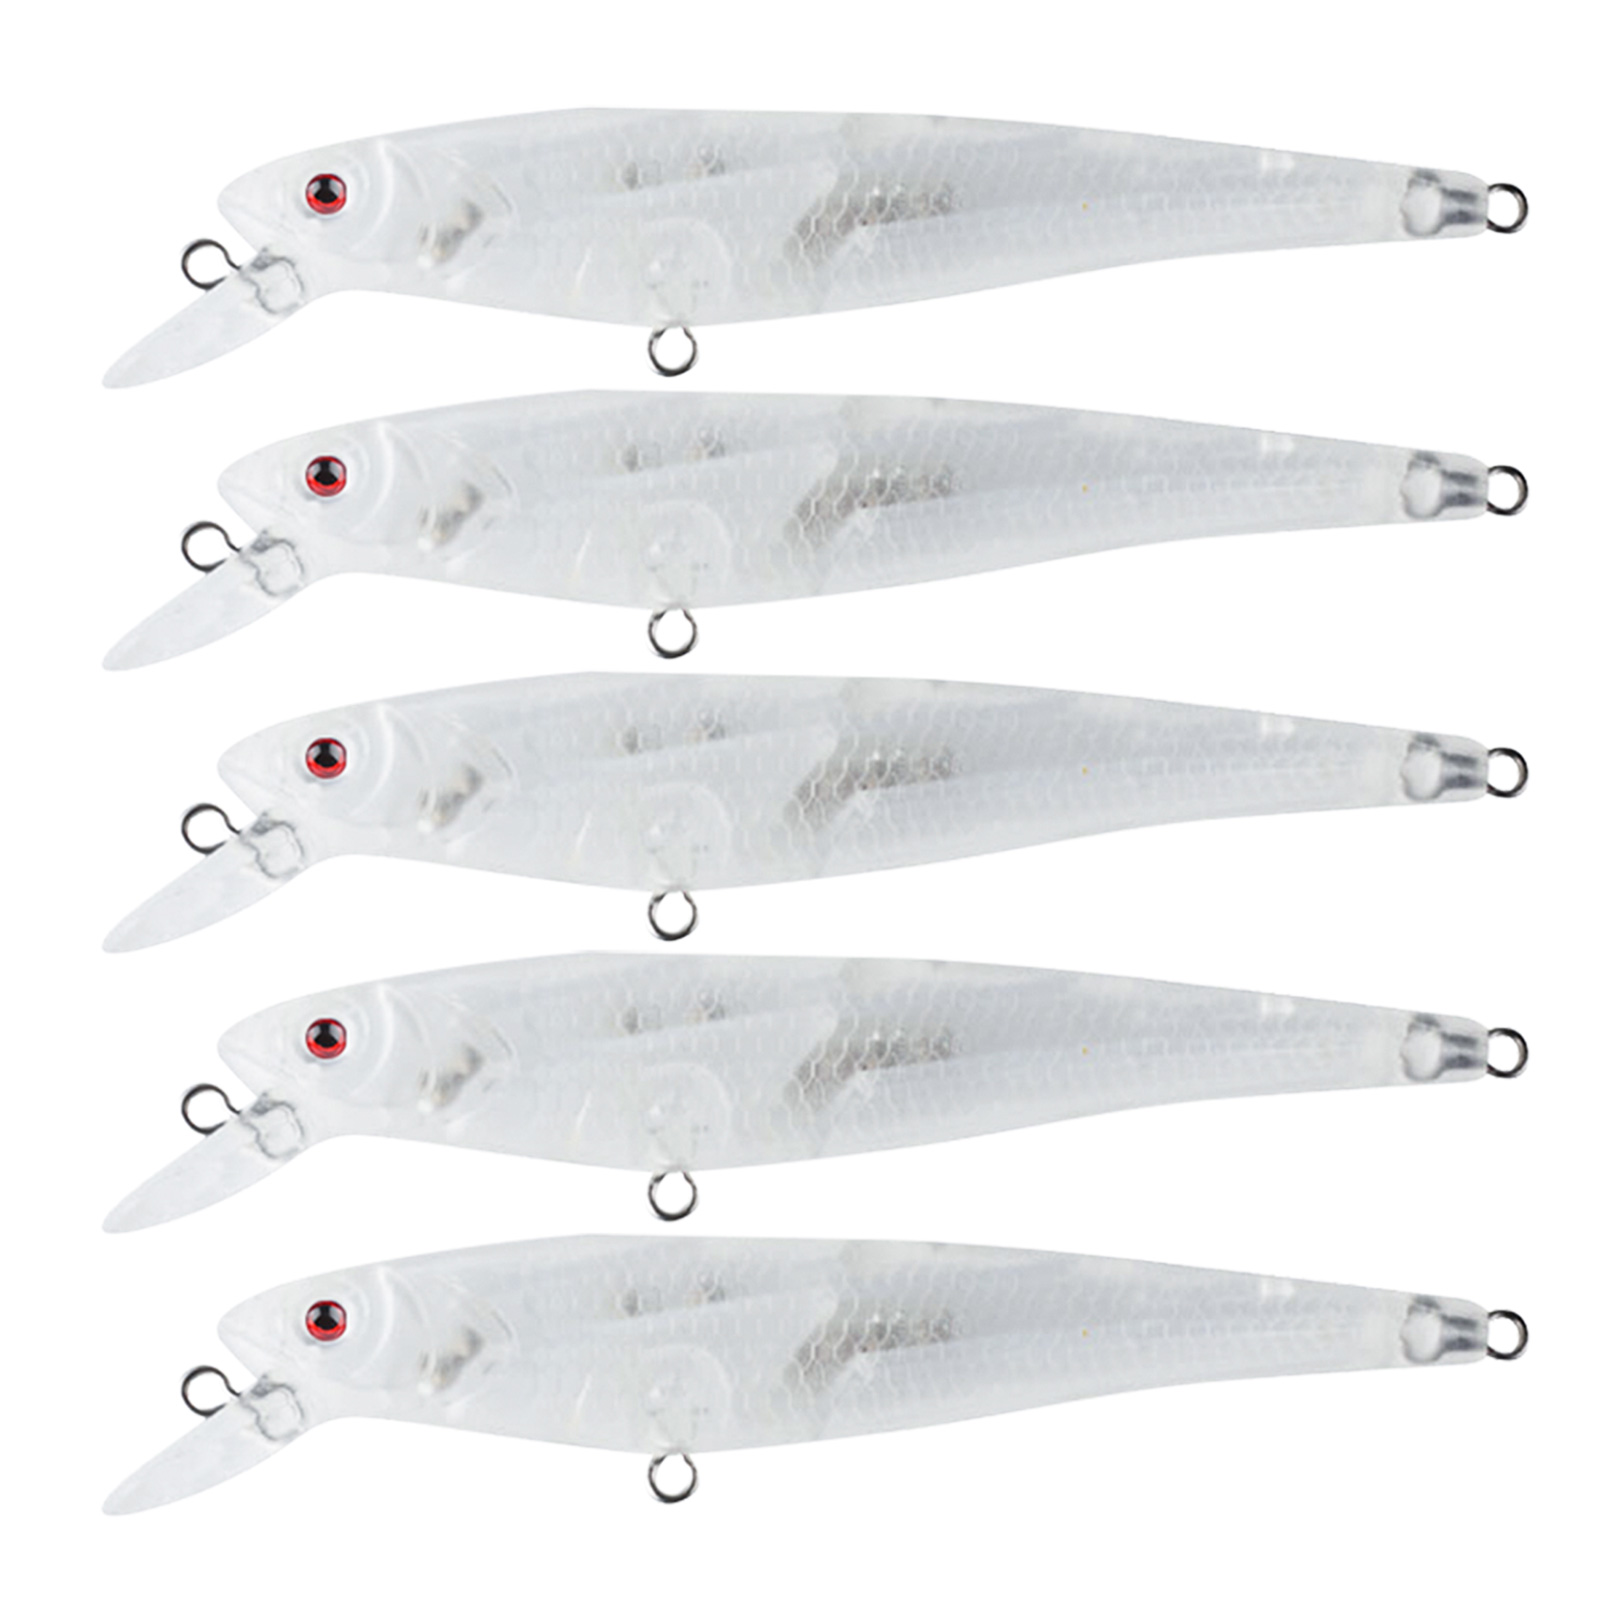 FREE FISHER Wholesale 20pcs Fishing Hard Lure DIY Unpainted Baits 10cm 7g Transparent Blank Minnows ABS Hard Artificial Bait Embryo with Steel Rattles